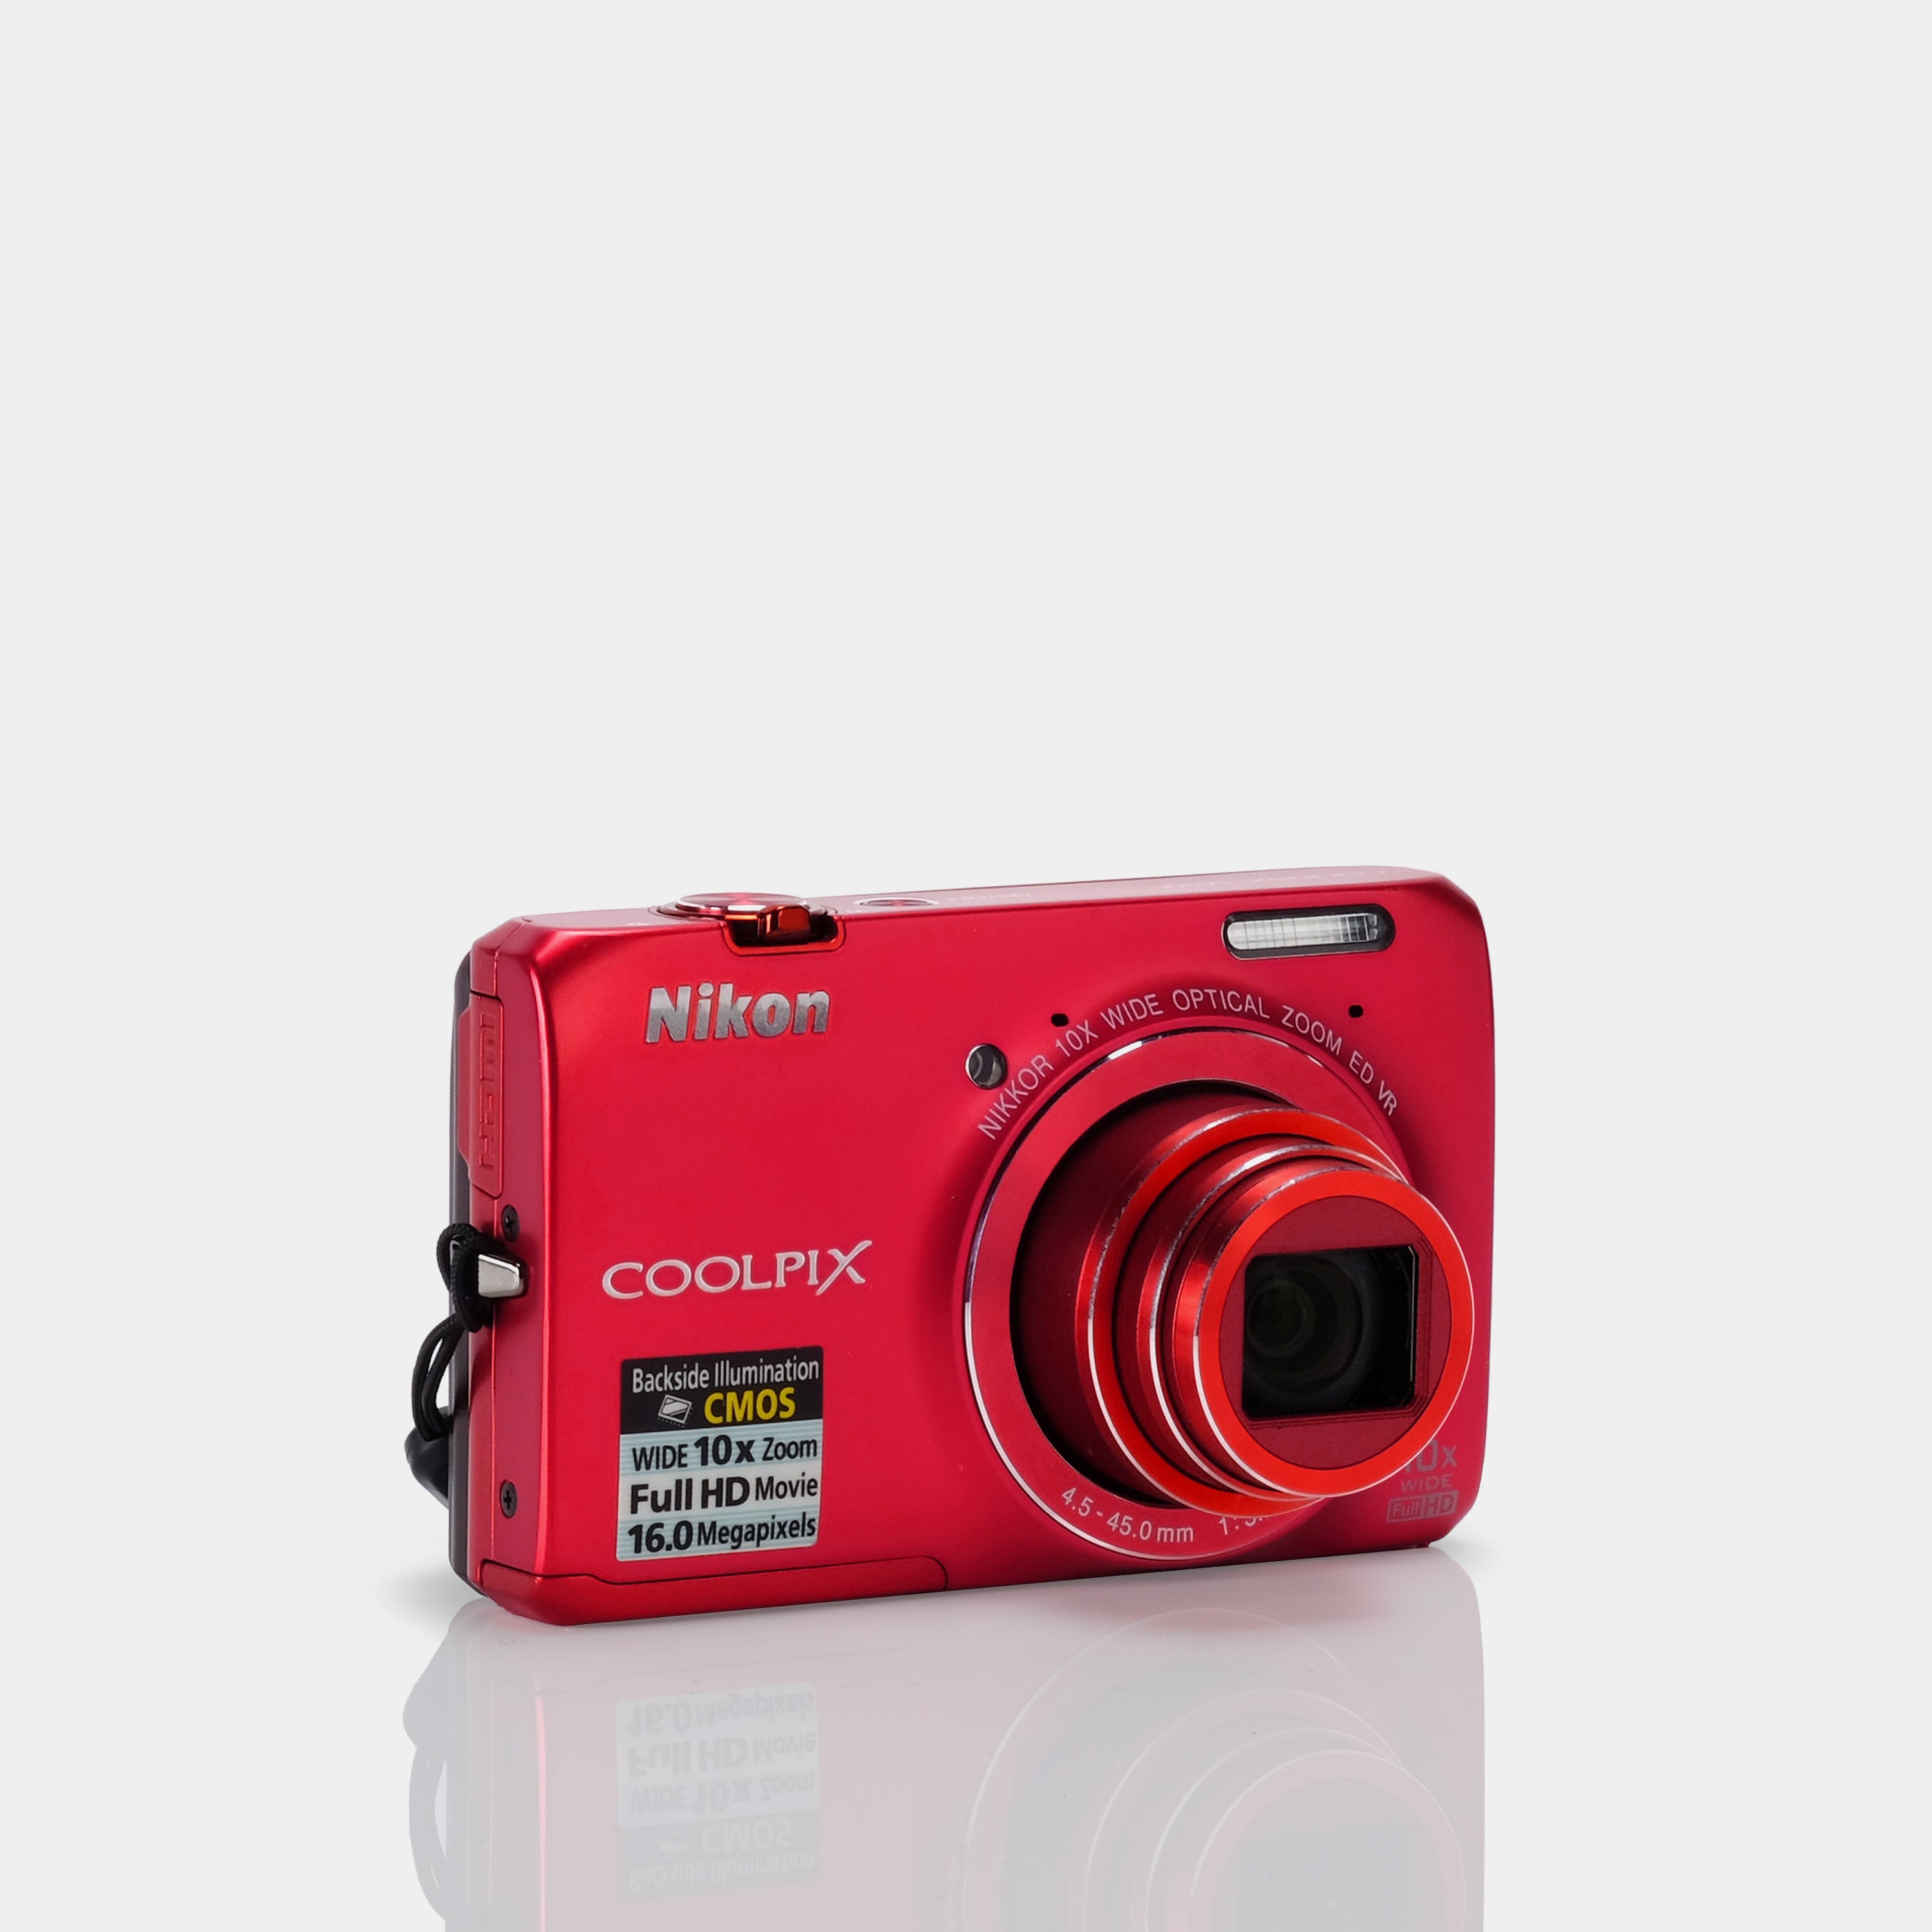 Nikon Coolpix S6300 Red Point and Shoot Digital Camera